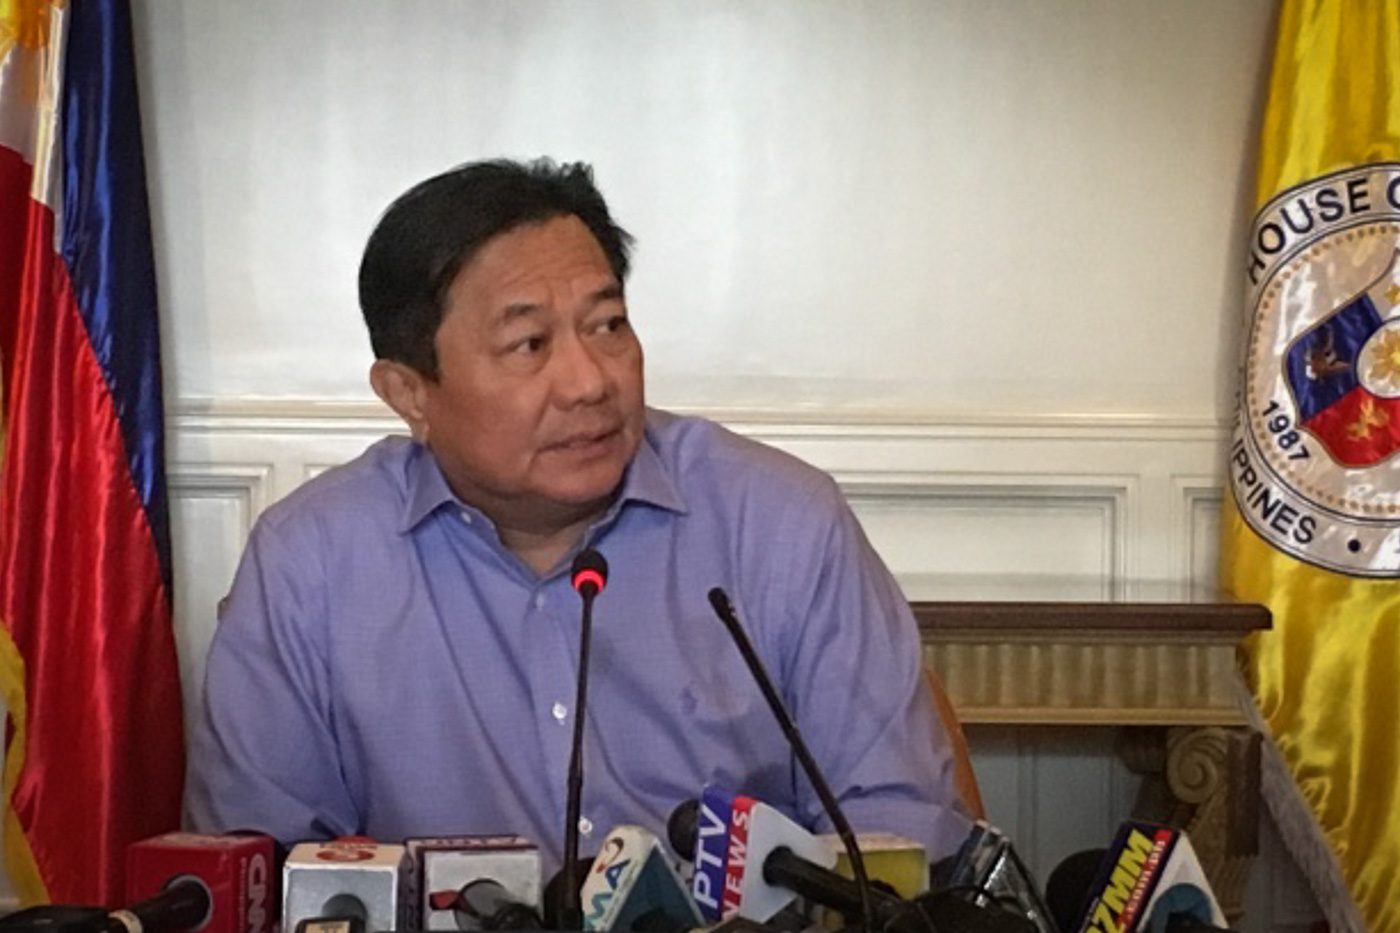 REPS IN THE NARCO LIST. Speaker Pantaleon Alvarez says is still mulling whether or not he would talk to the congressmen allegedly involved in drugs. Photo by Mara Cepeda/Rappler 